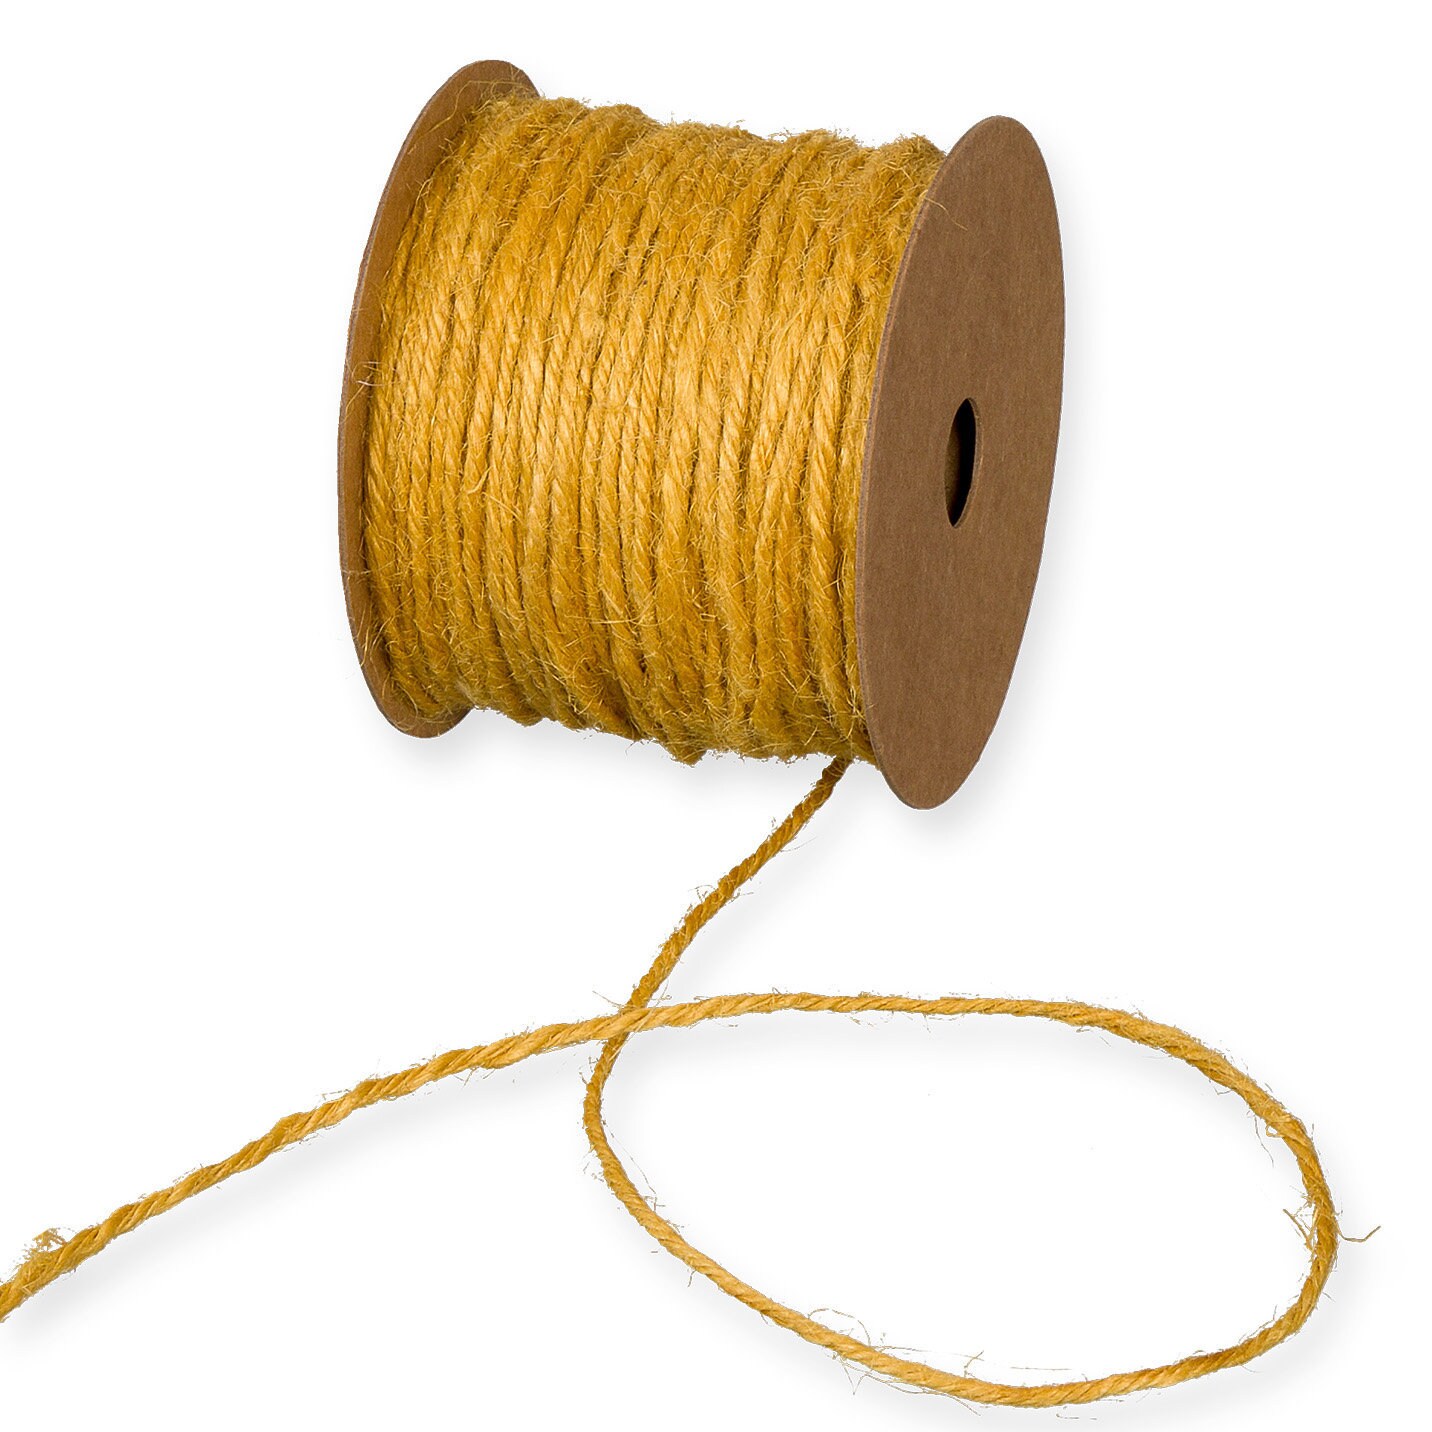 2mm Thick Mix Color Cotton Bakers Twine String Cord Rope Rustic